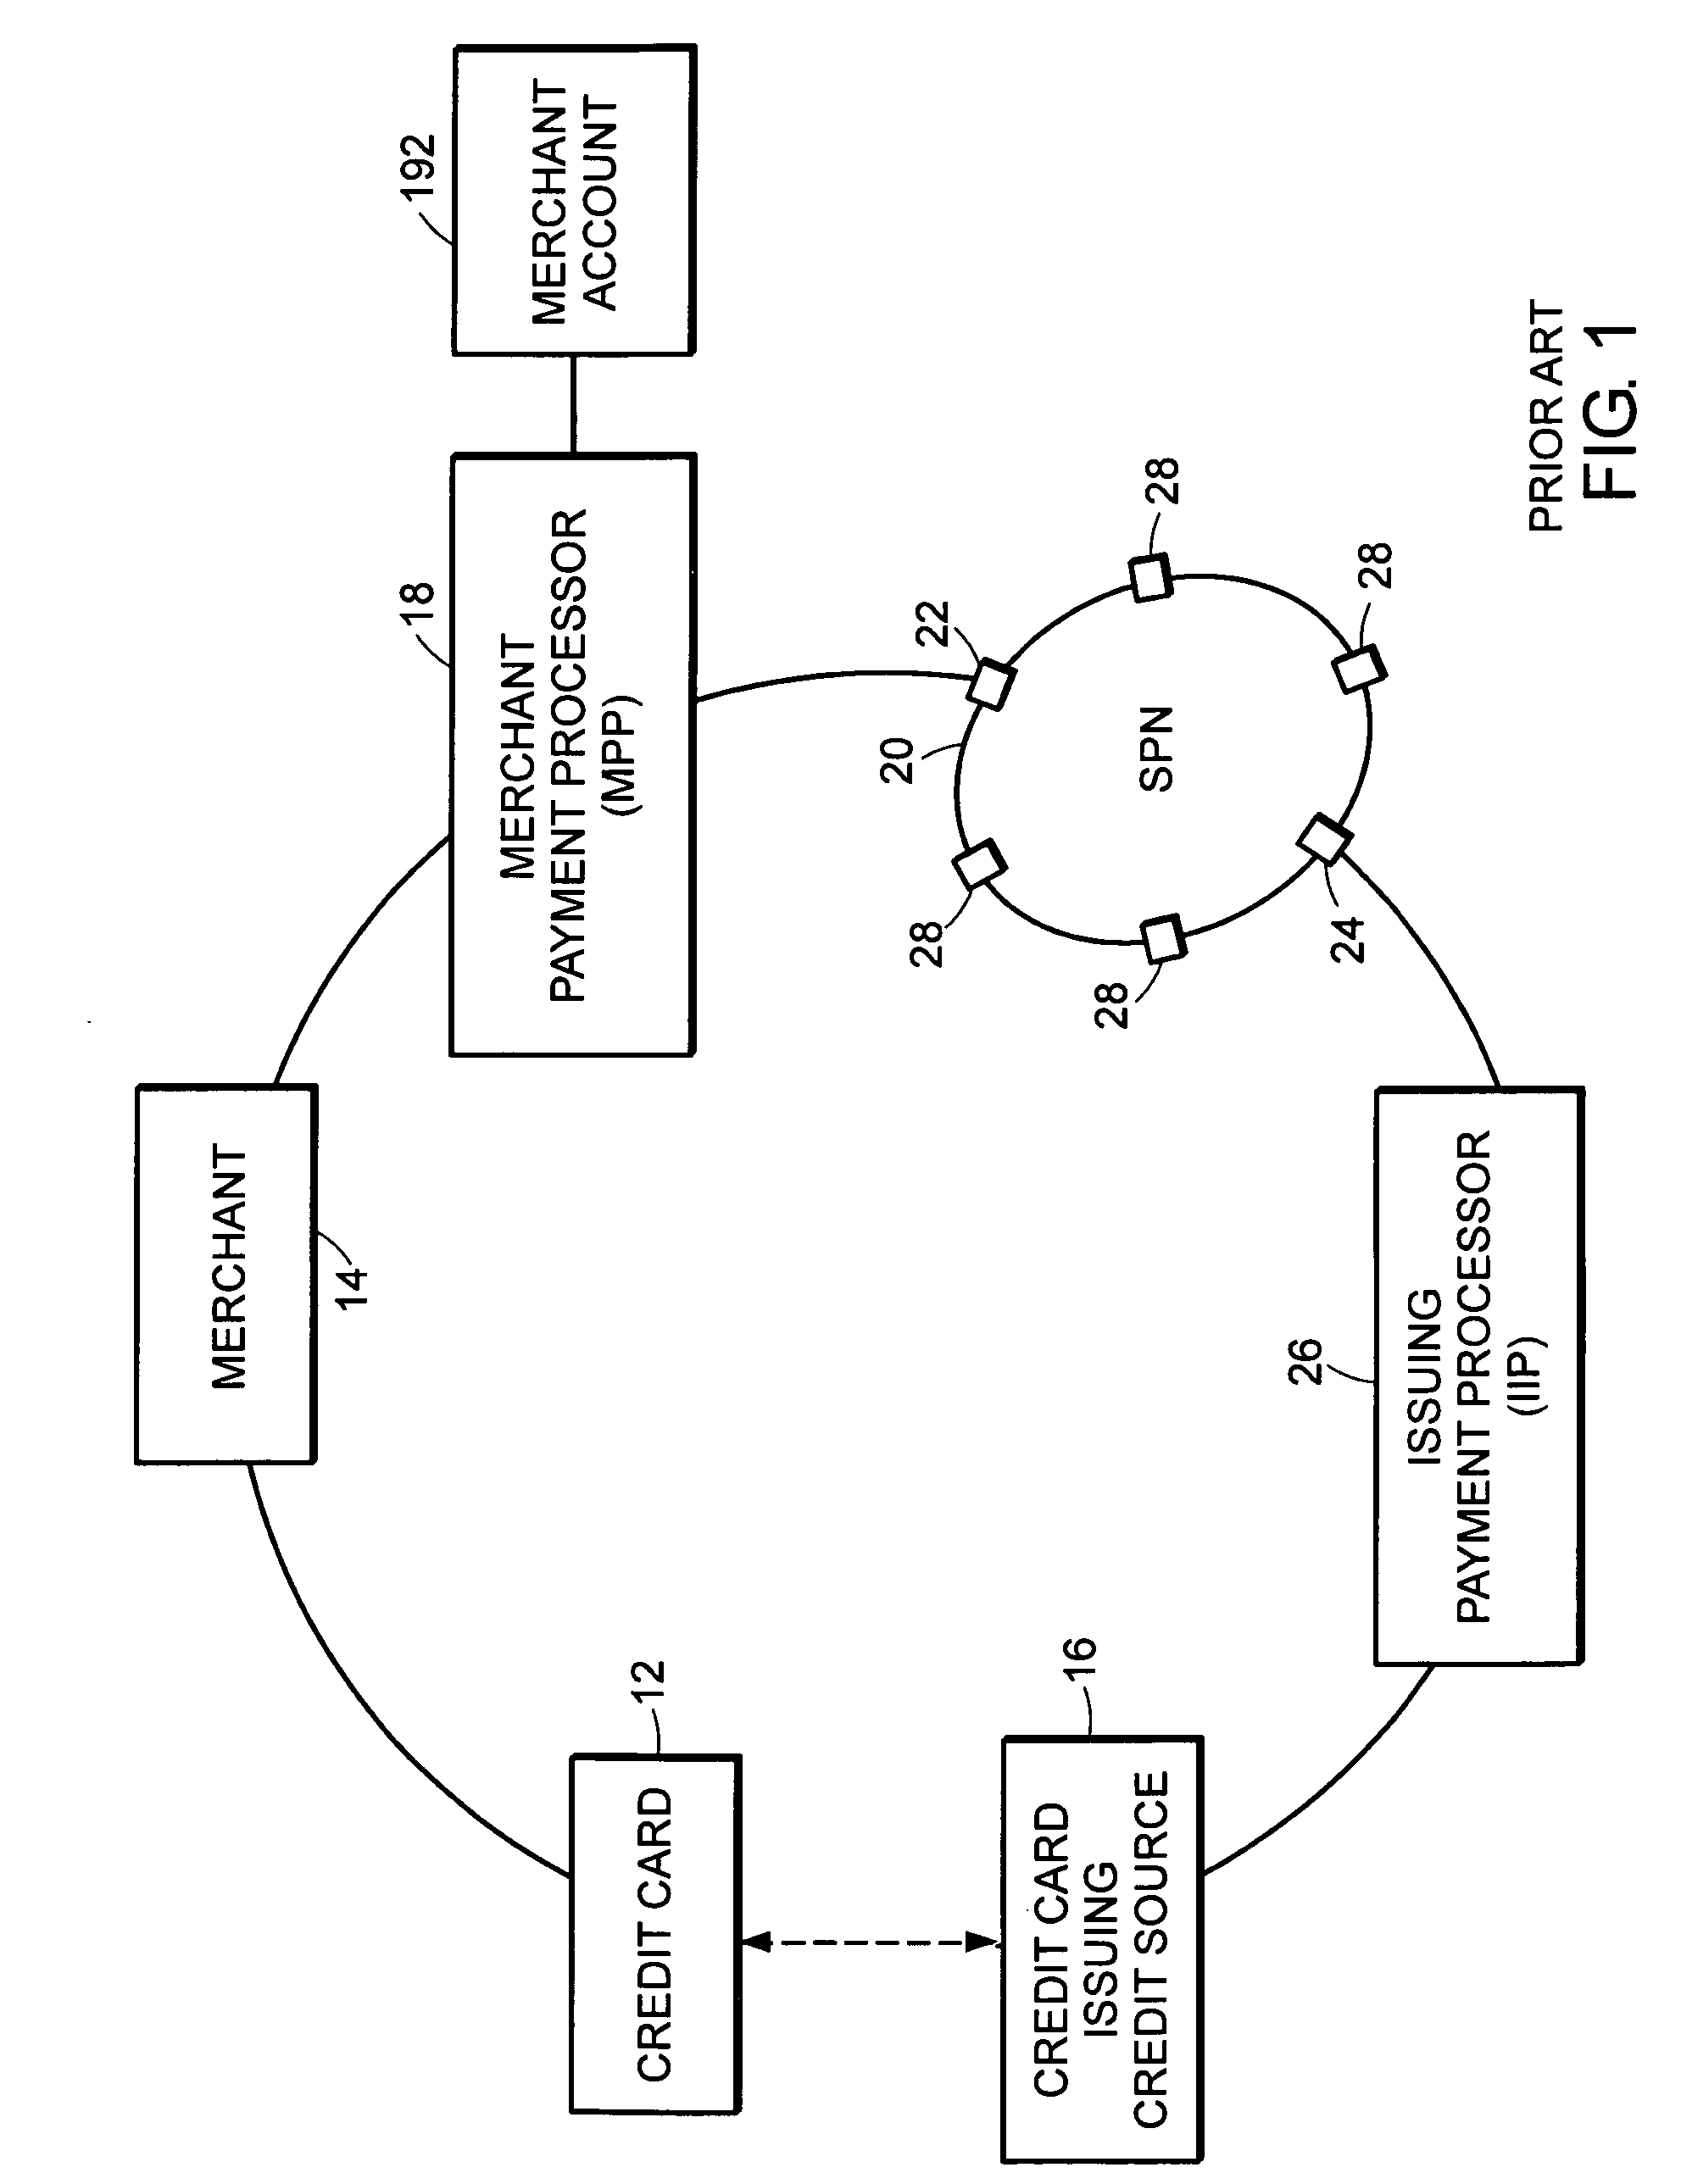 Method and system for processing financial transactions